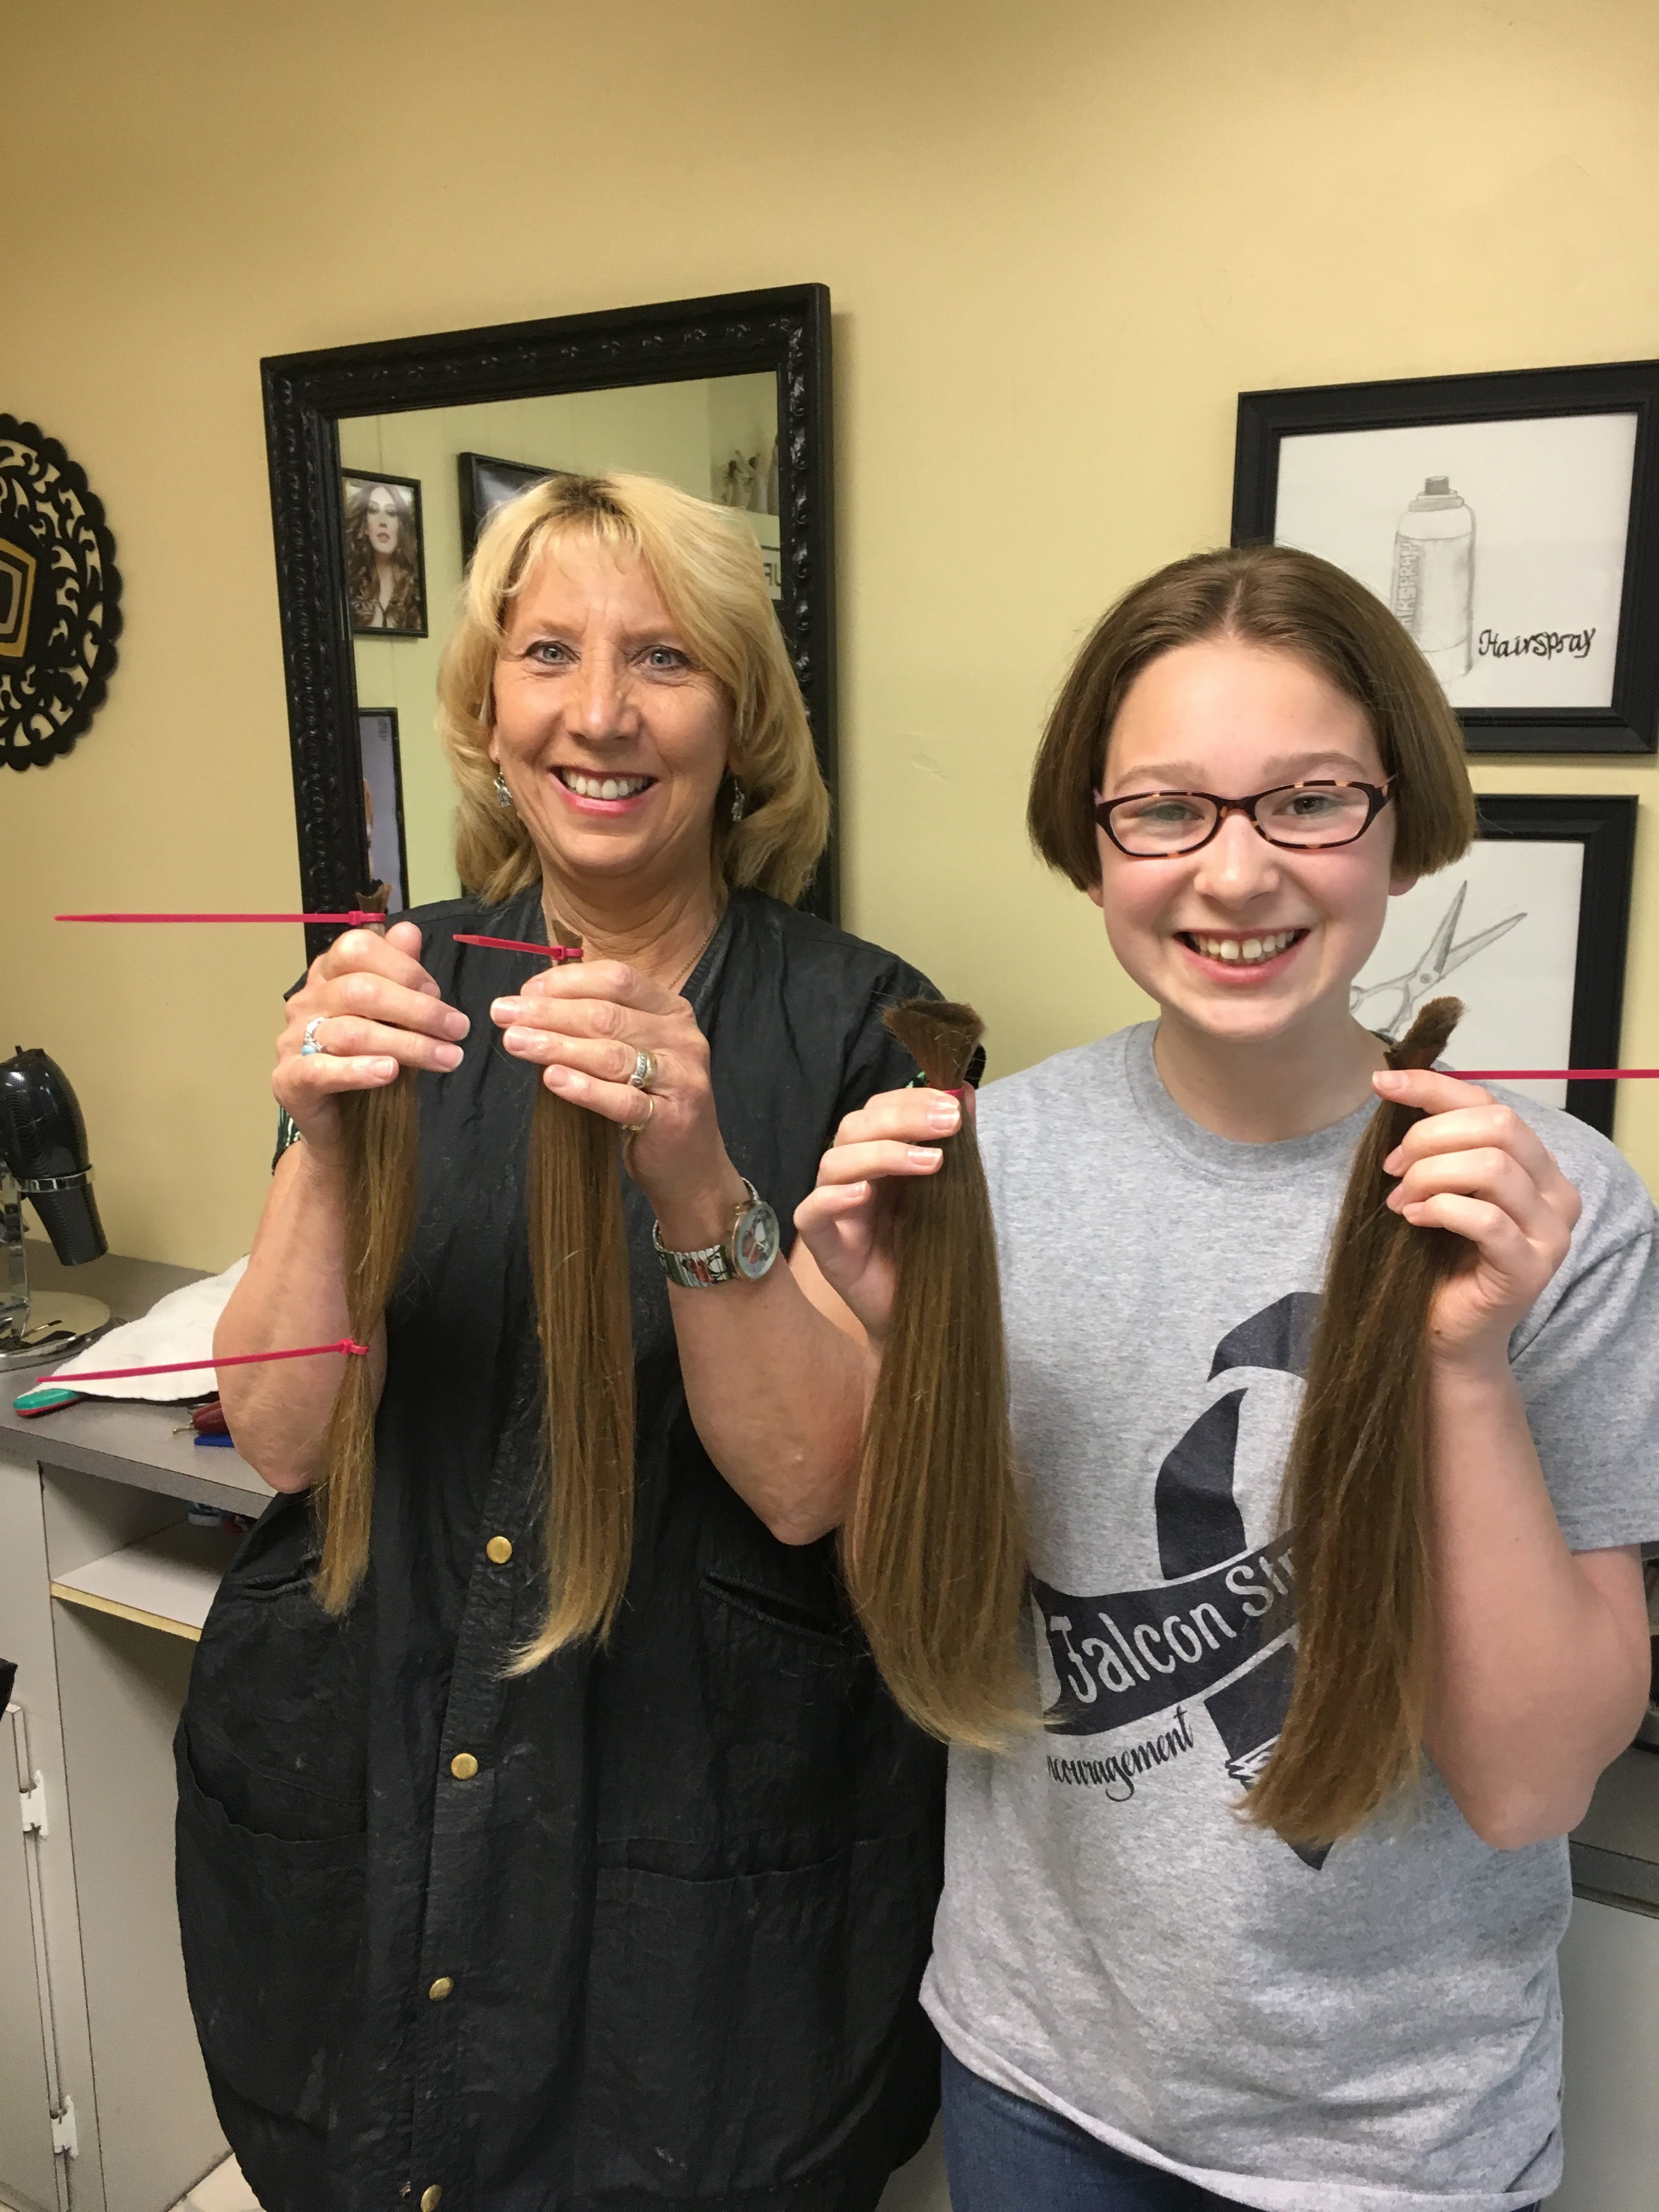 Hair cut-a-thon to benefit Wigs For Kids Saturday